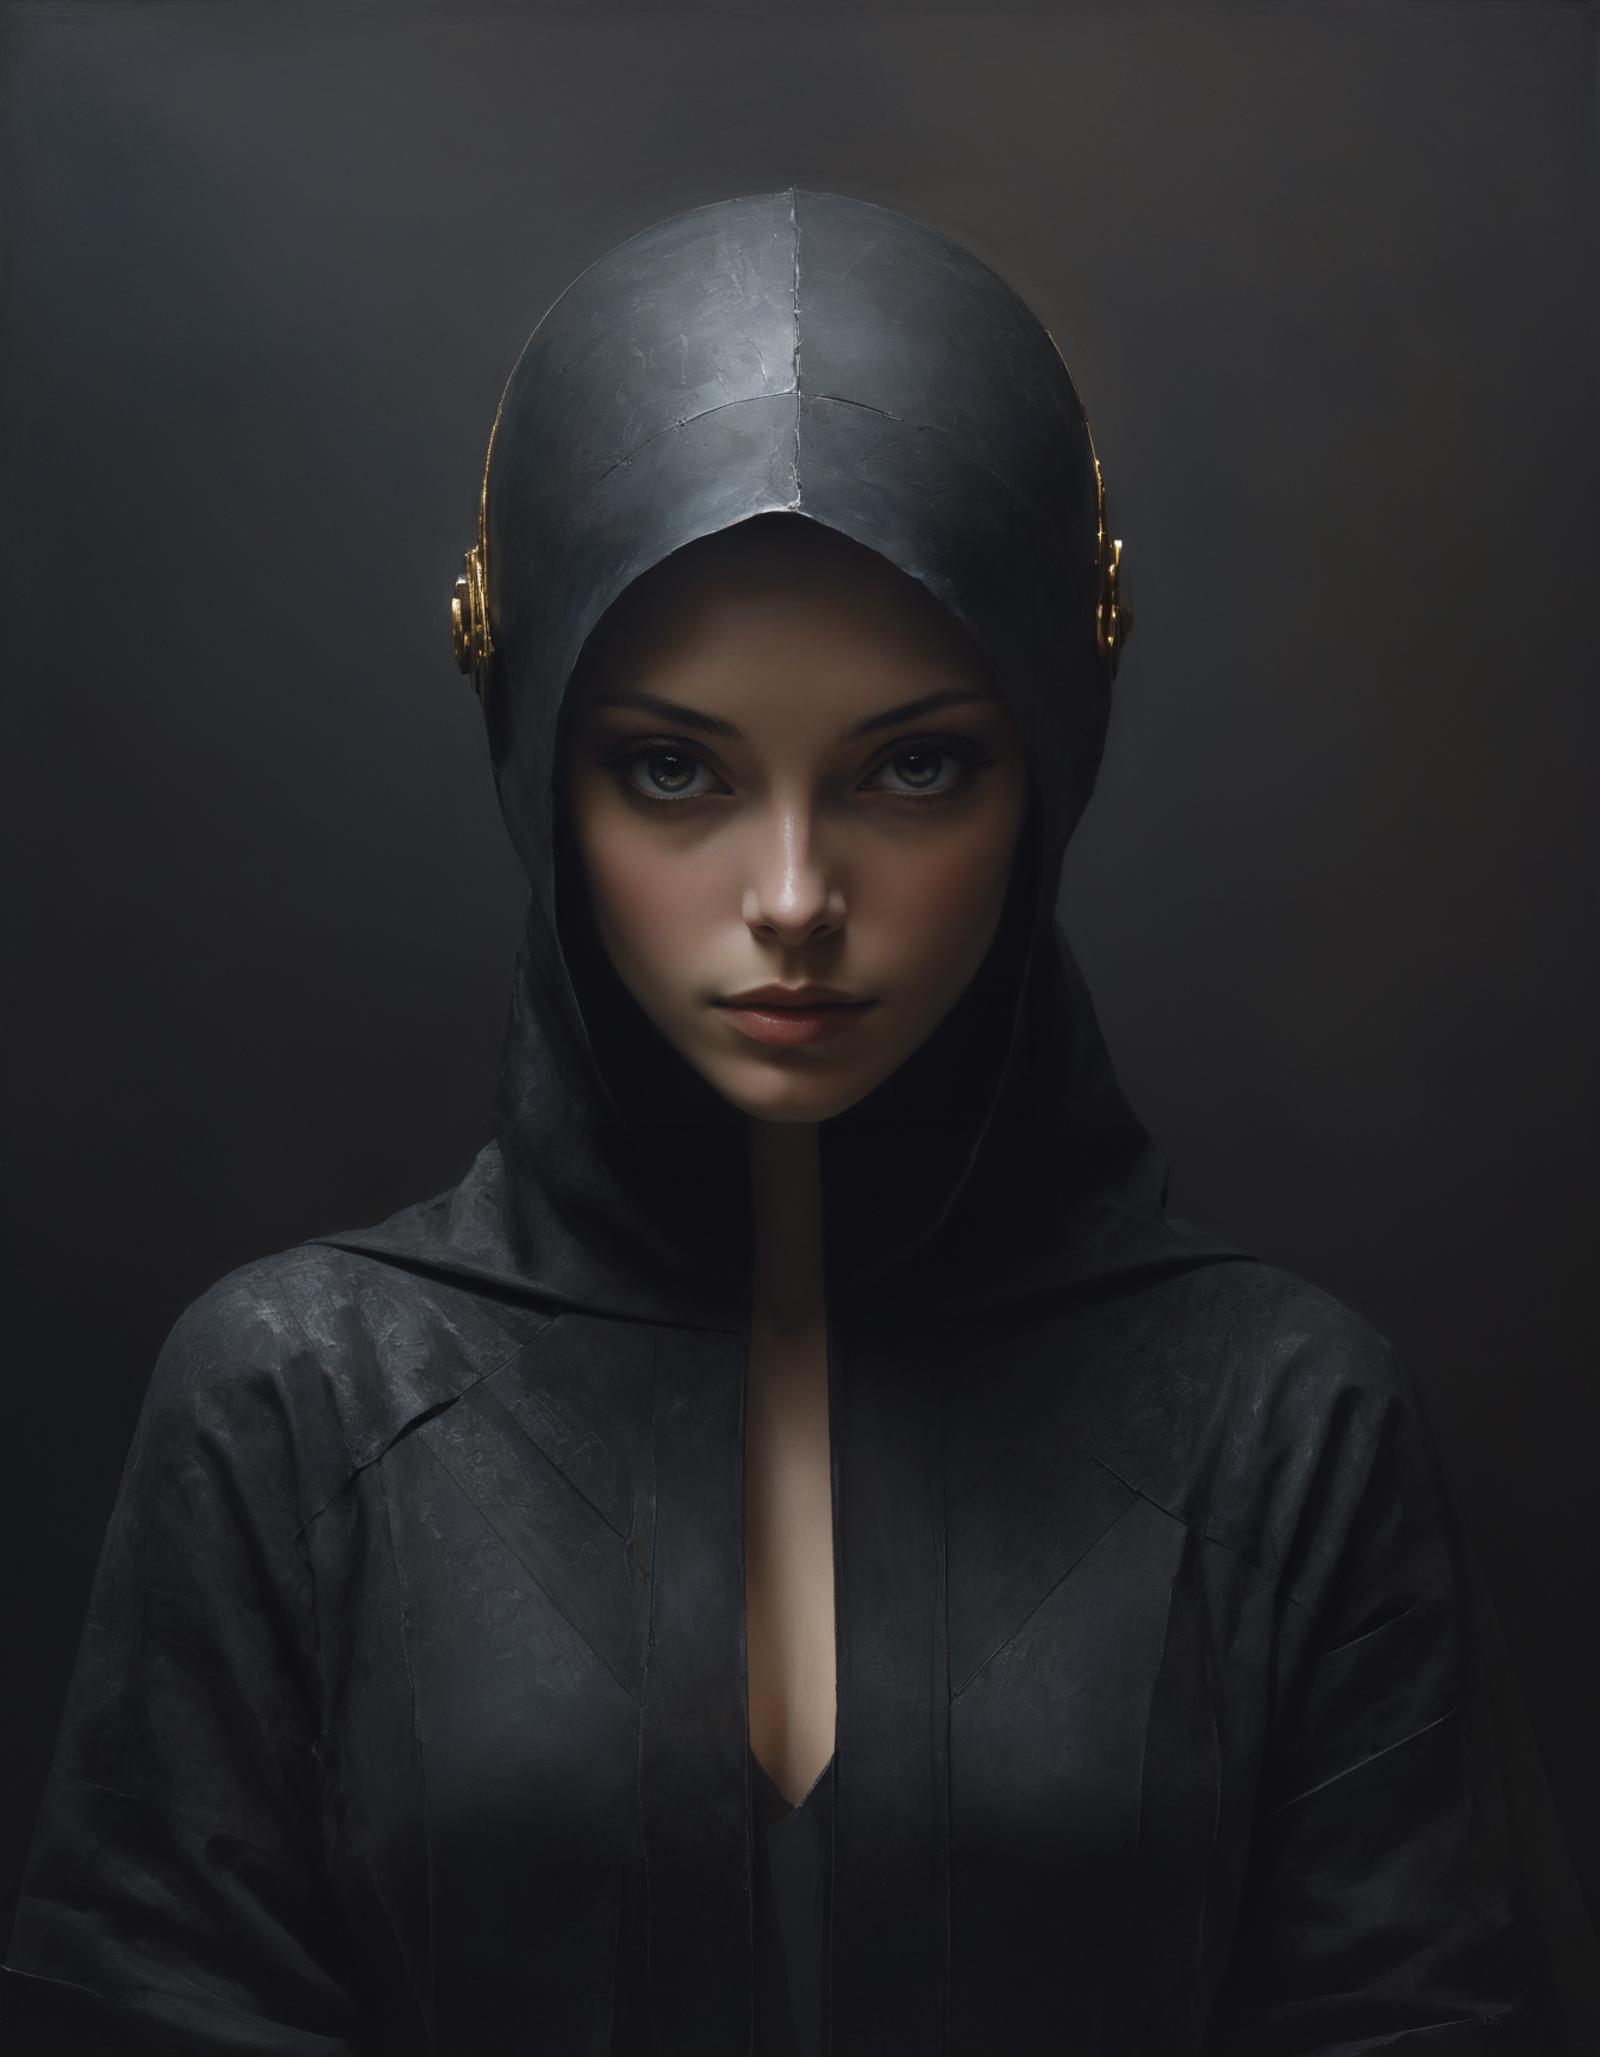 A woman wearing a black hooded robe with a gold clasp.